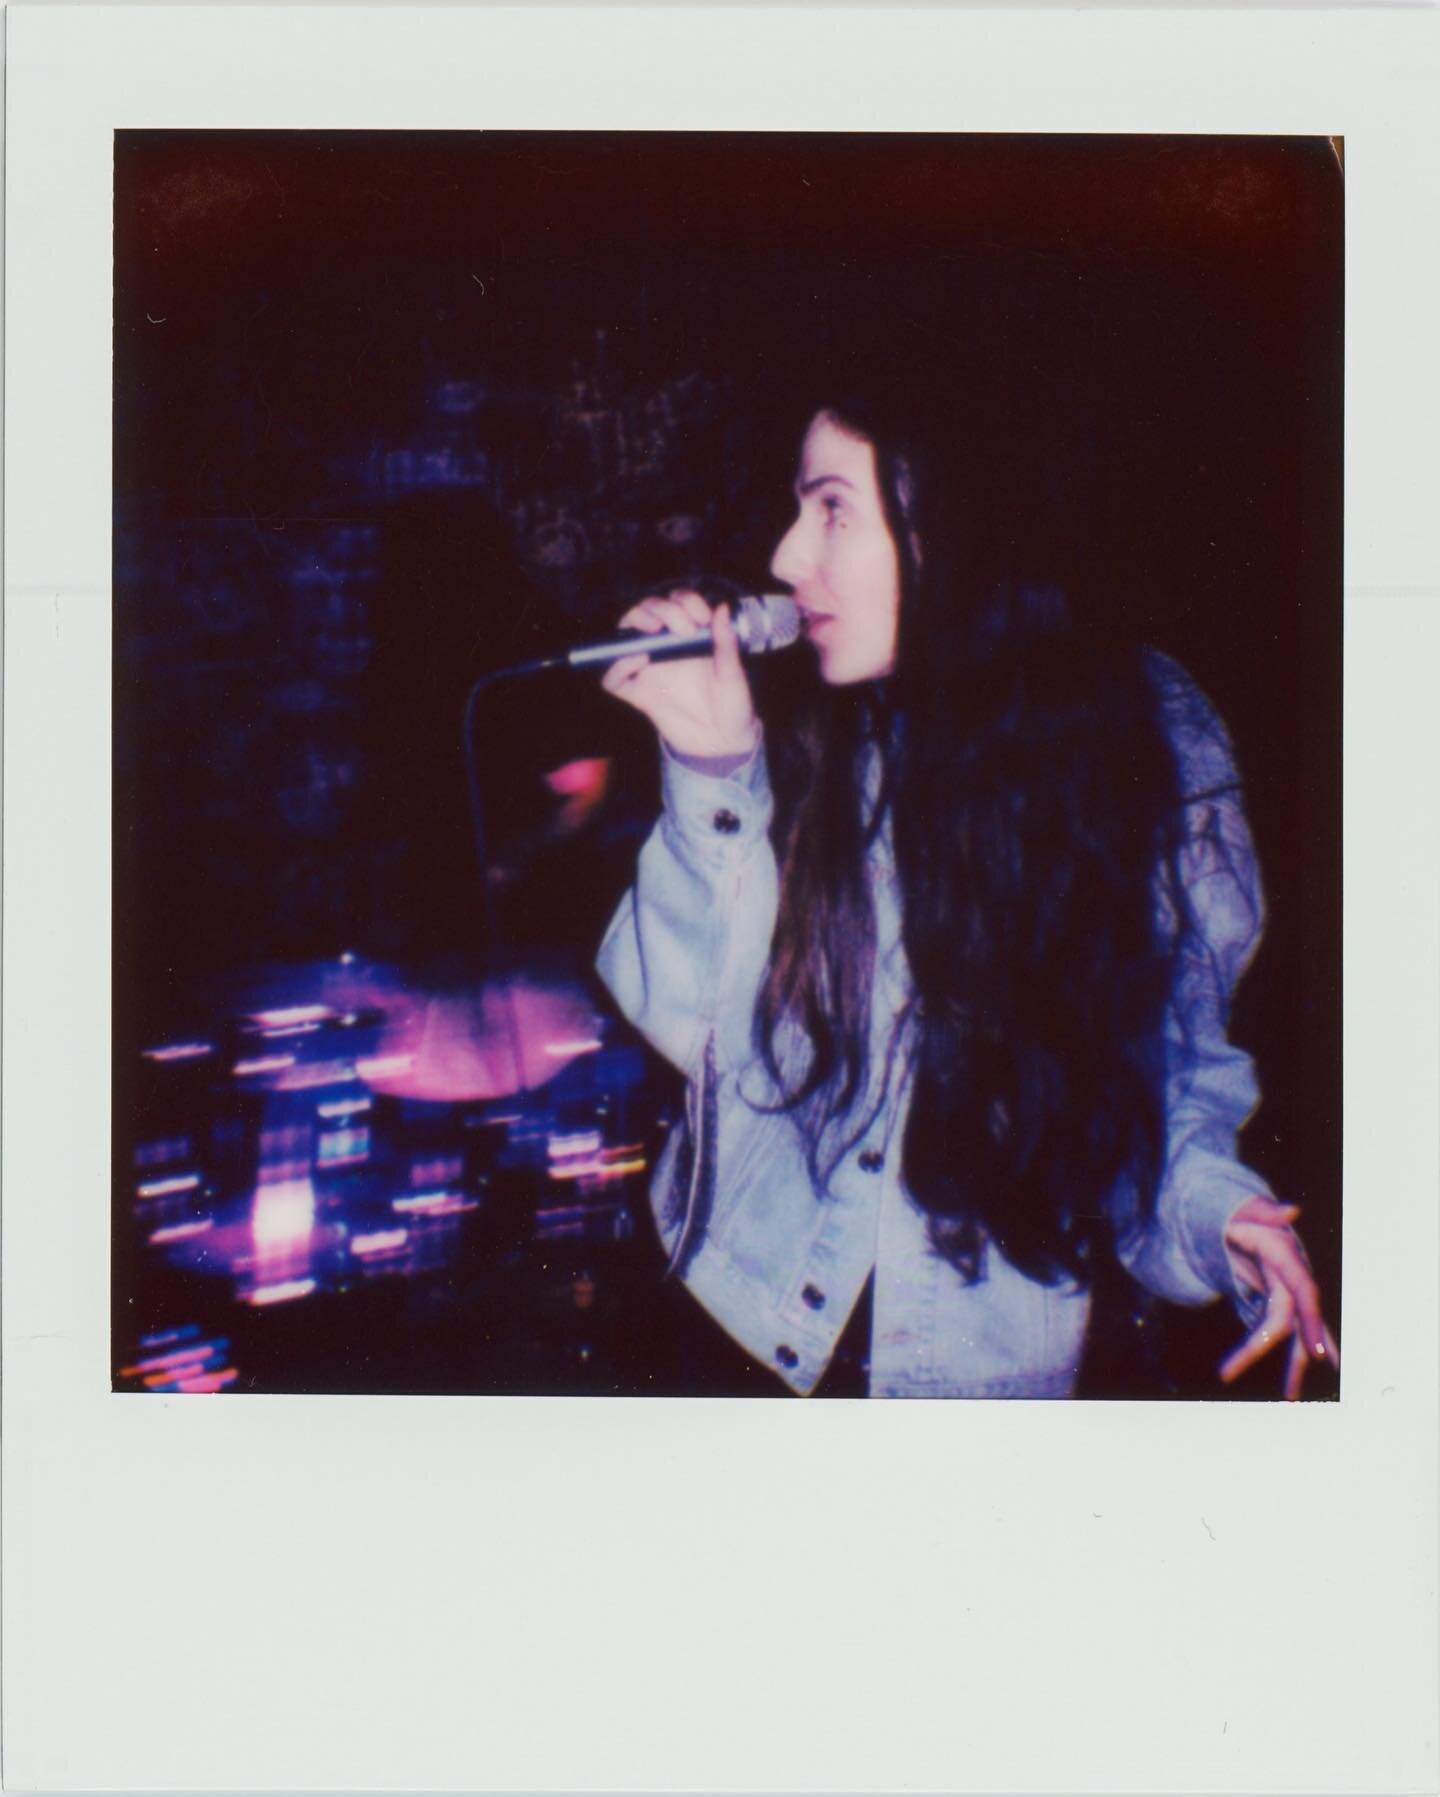 Throwback to an another amazing Polaroid by @cdwenn when we had the pleasure of playing the incredible @rratclub. It&rsquo;s rare to roll into a strange town and play for such a warm, welcoming community that truly appreciates art. Thank you to @aros